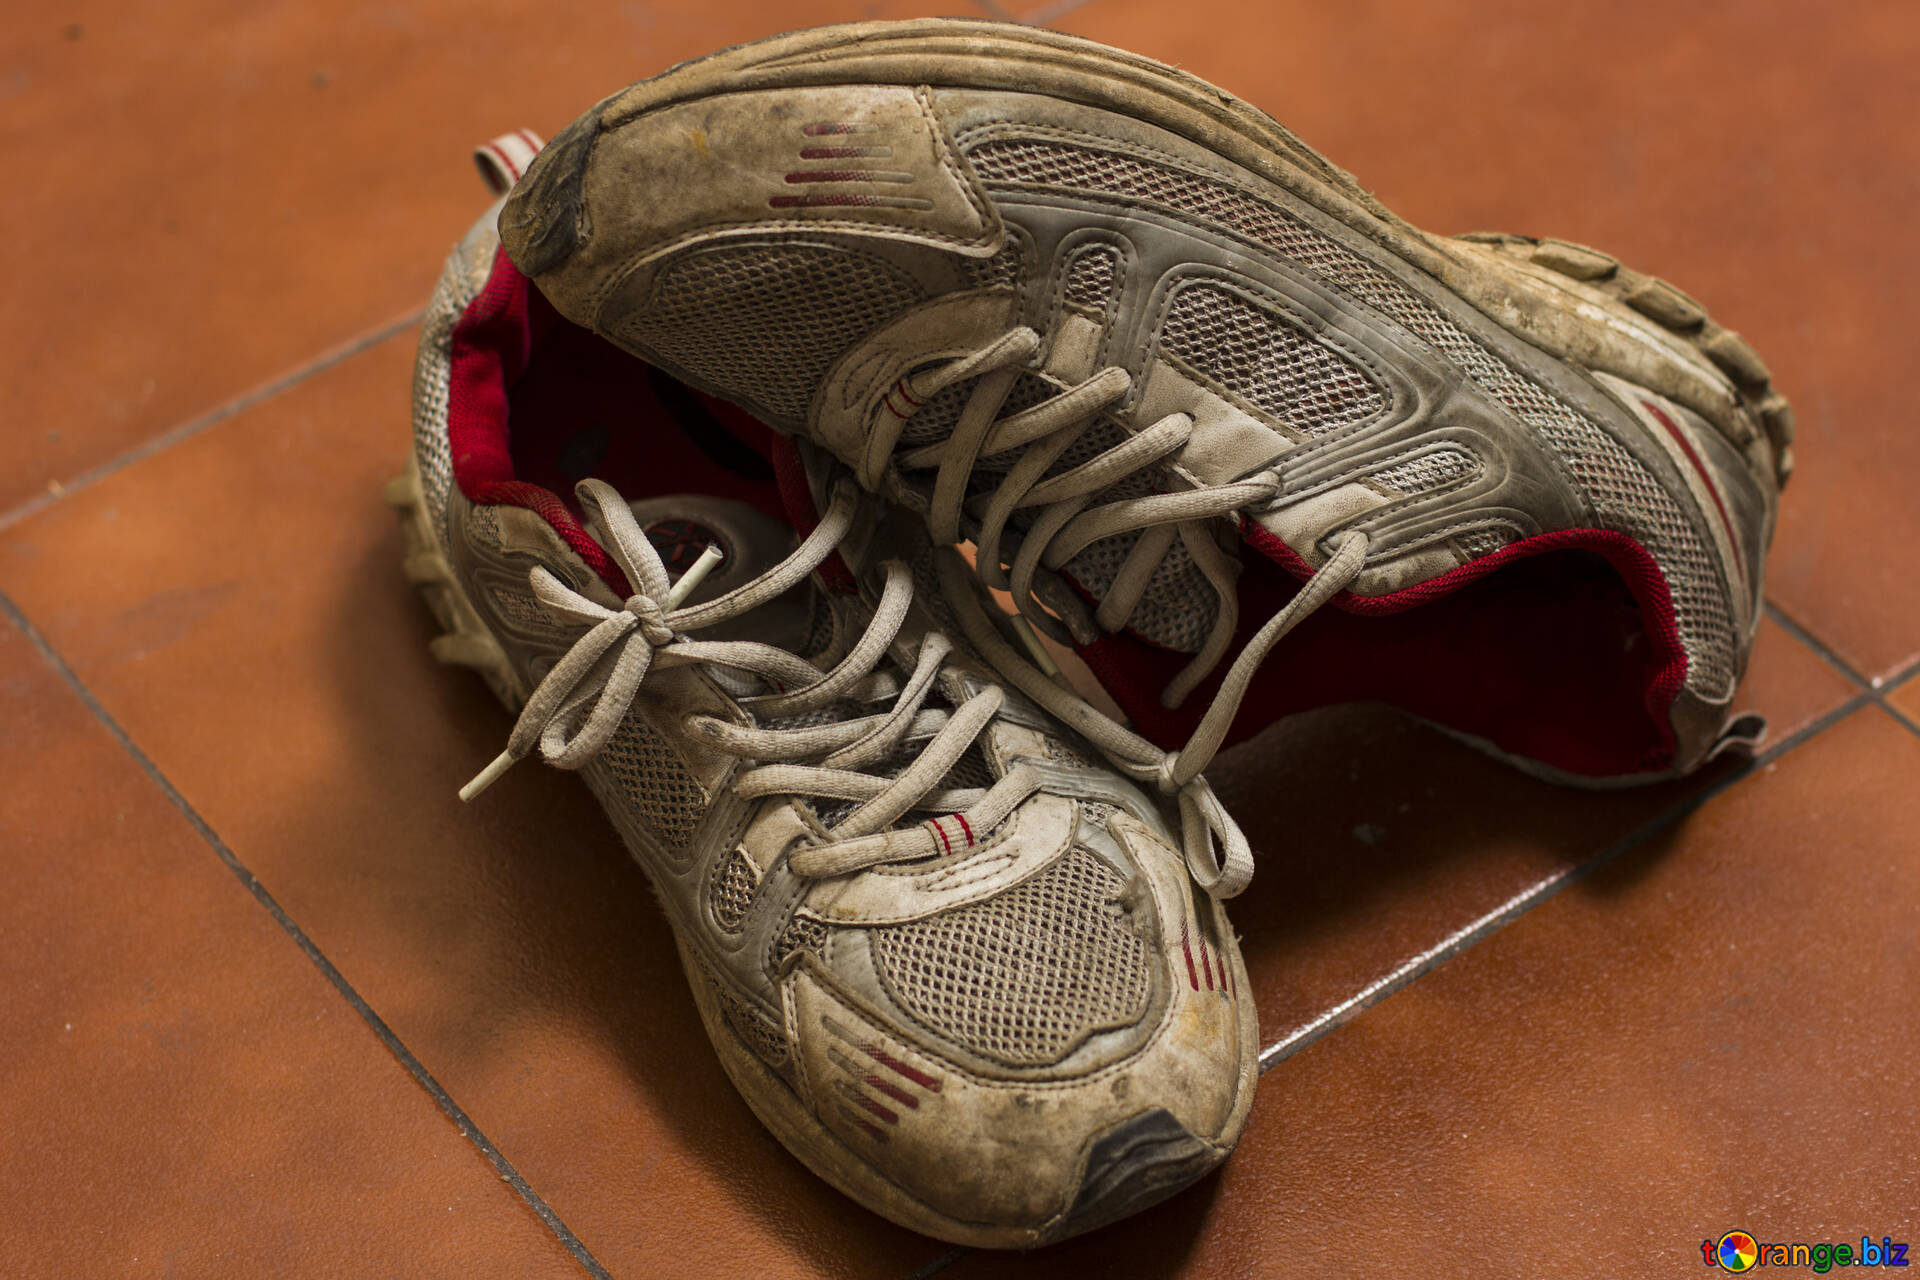 RV smells- How to find, eliminate and prevent them from ruining your adventure. dirty pair of tennis shoes.